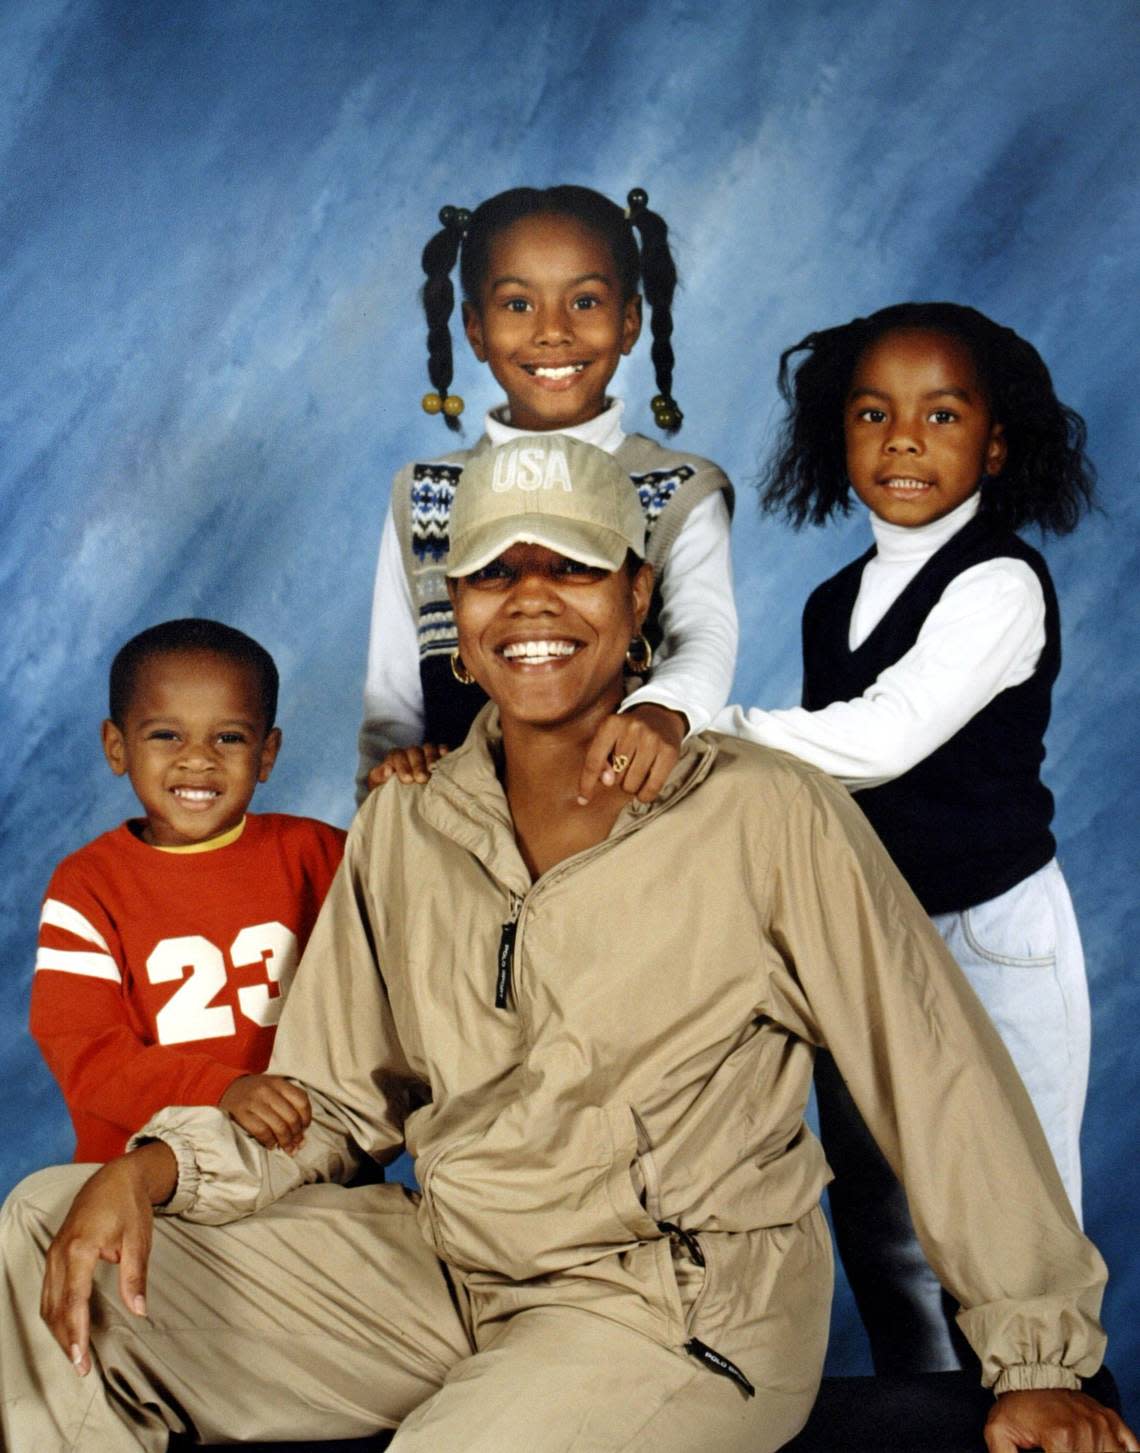 Leonard Taylor was convicted for the 2004 murders of Angela Rowe along with her three children, from left, Tyrese Conley, 5, Alexus Conley, 10, and Acqreya Conley, 6.